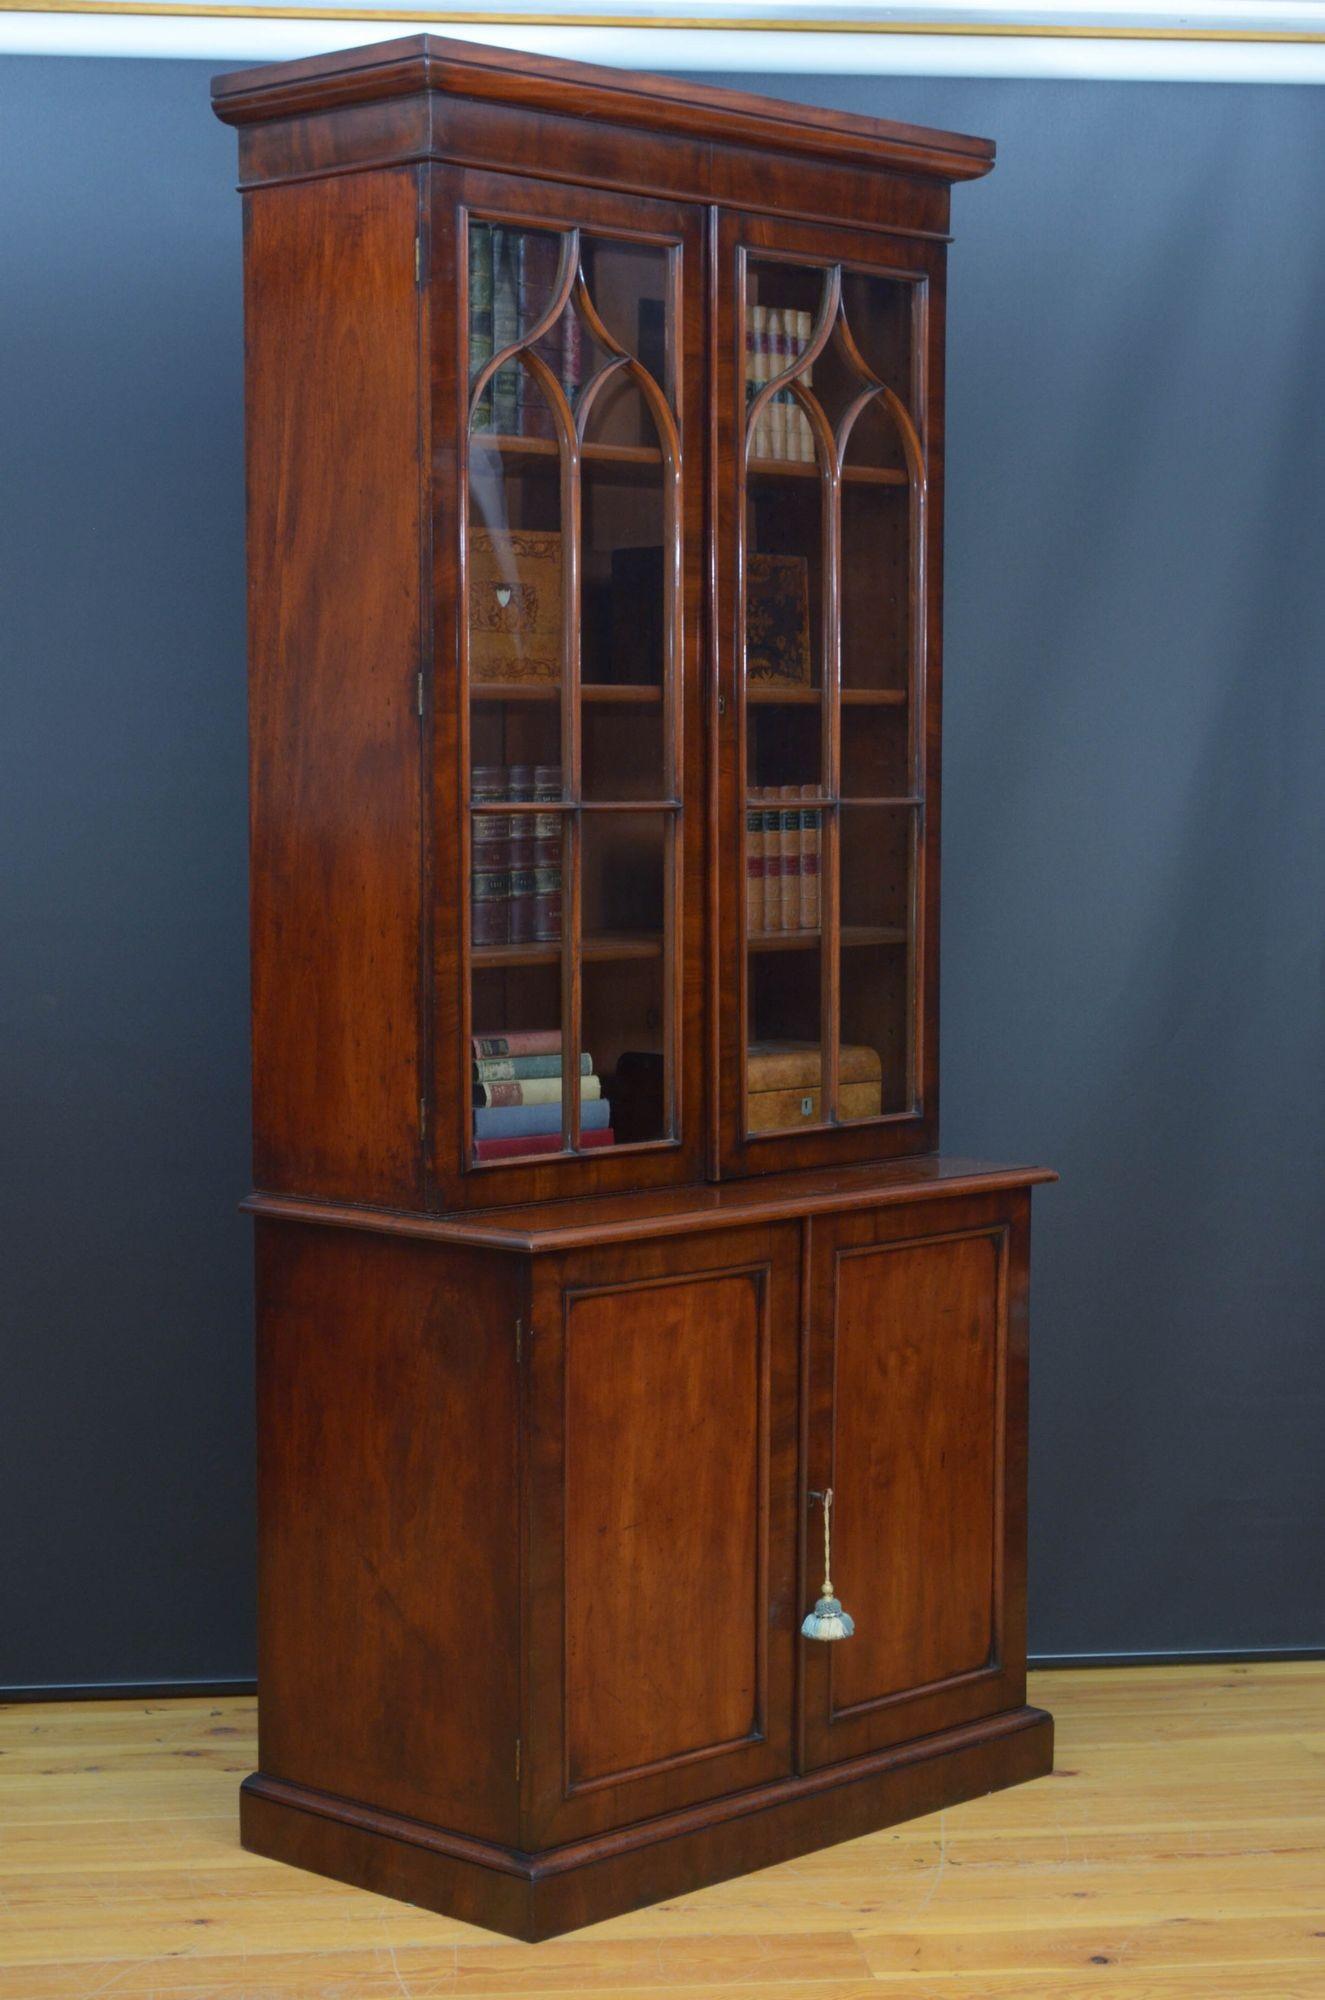 Sn5446 Fine quality and very elegant Regency bookcase in mahogany, having cavetto cornice above a shallow frieze and a pair of glazed doors with decorative mouldings, working lock and a key, enclosing three height adjustable shelves, the projecting